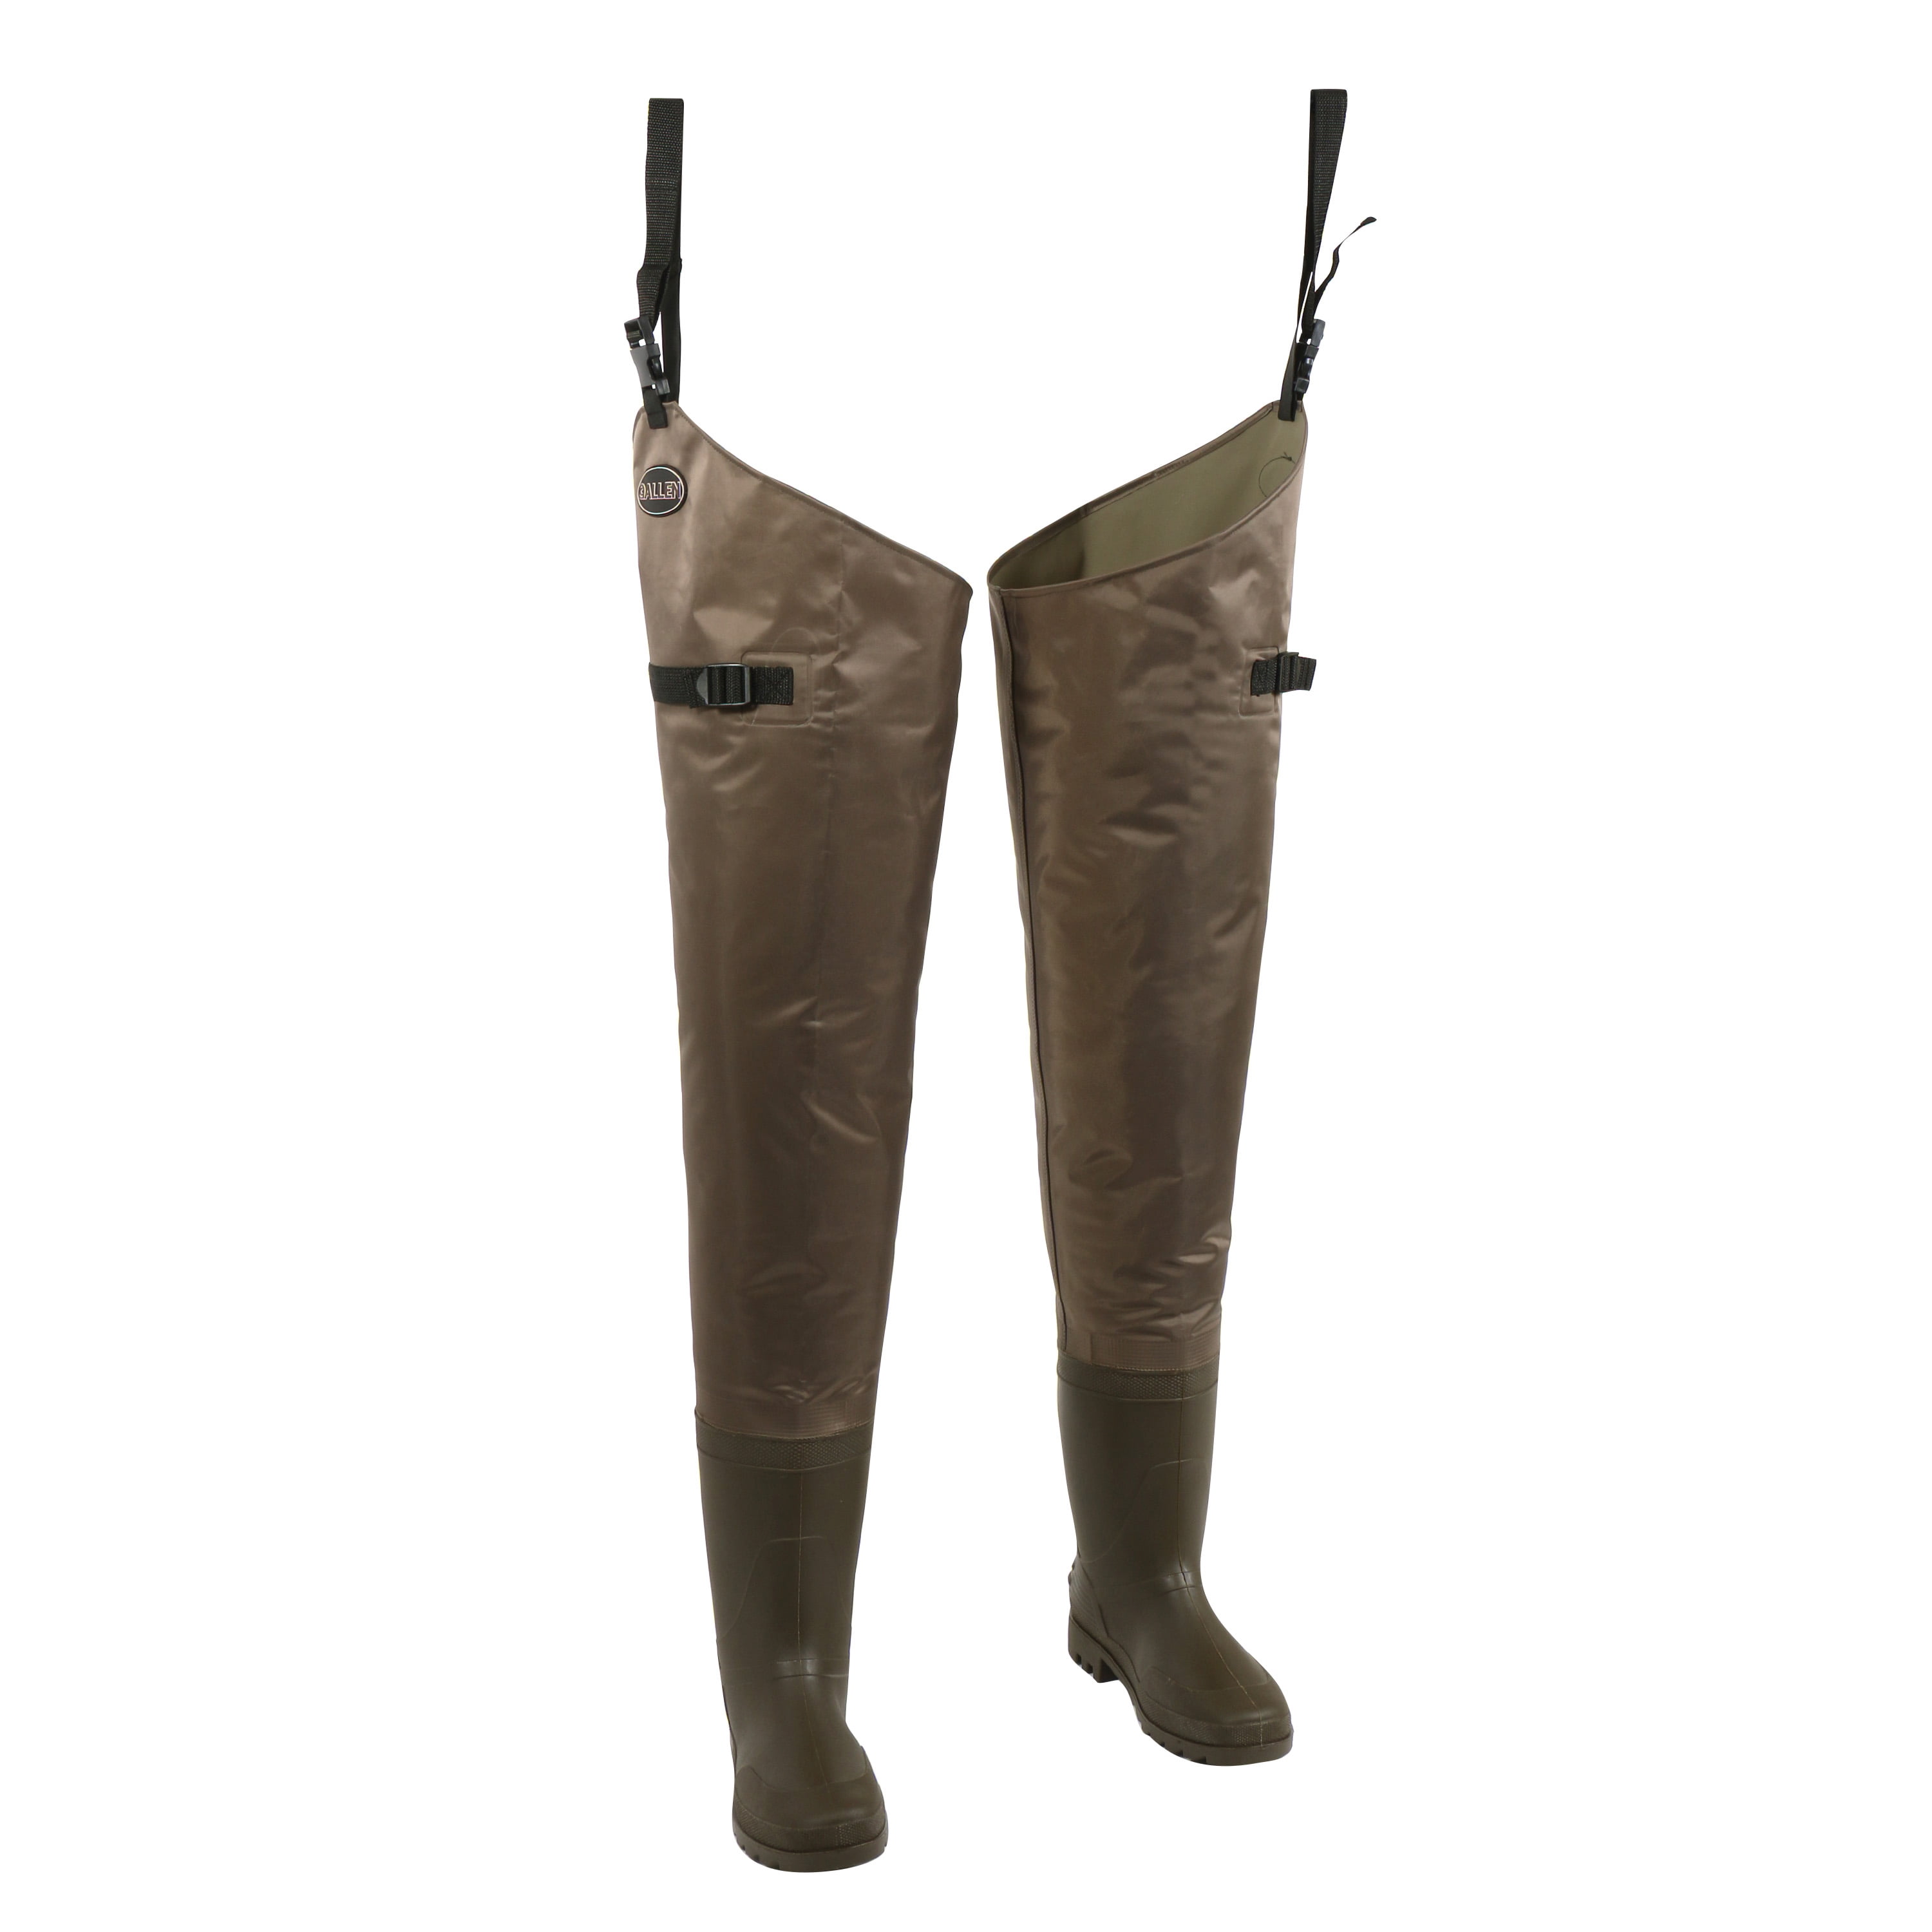 Allen Company Black River Hip Fishing Waders, Size 7, Chocolate Brown 